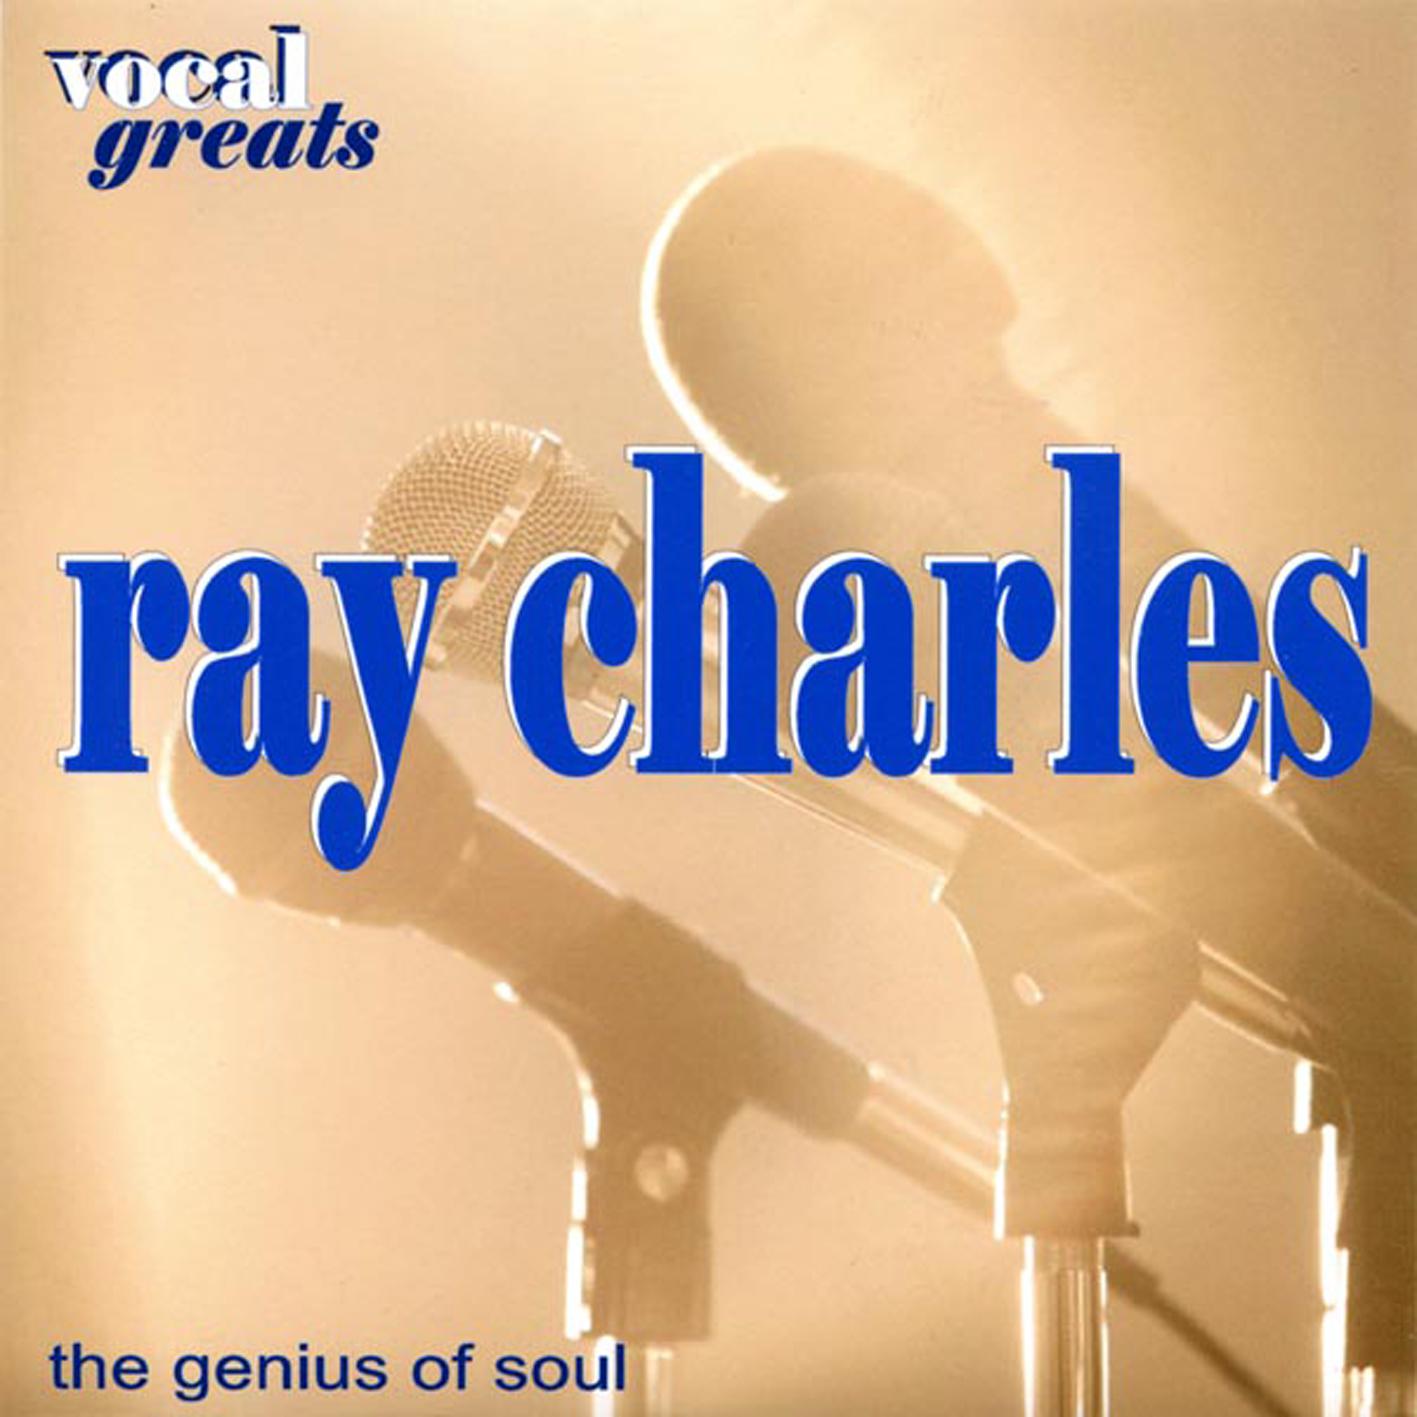 Vocal Greats: Ray Charles ' The Genius Of Soul'